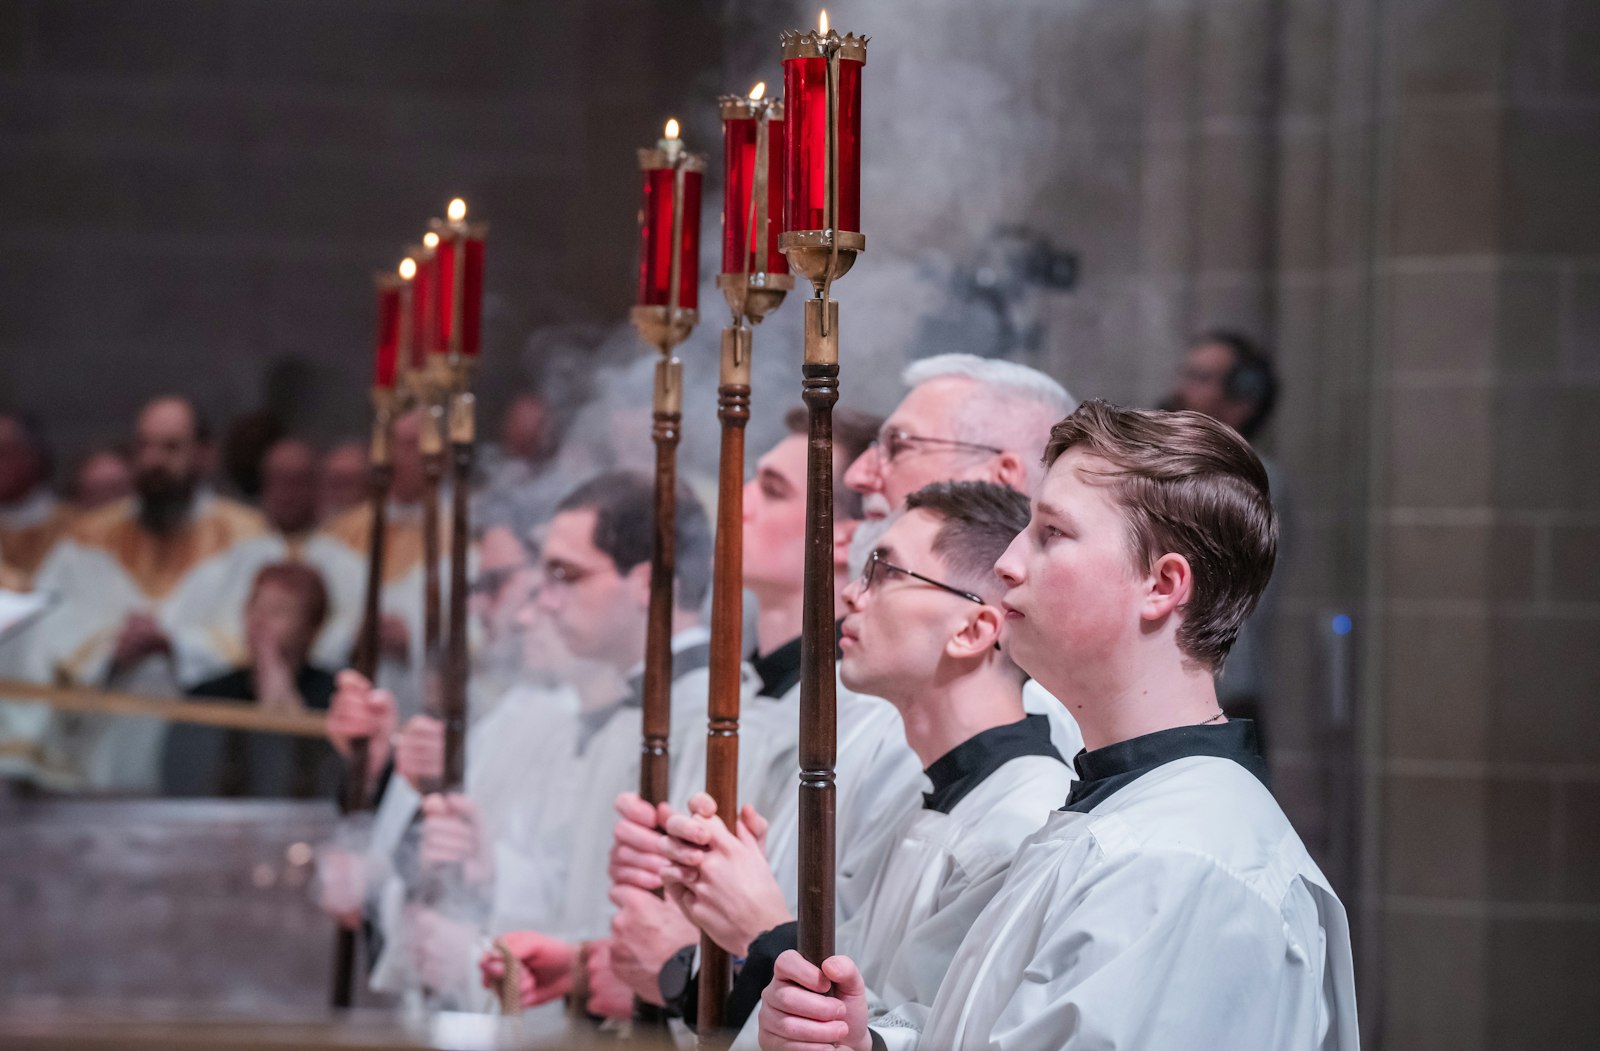 Altar servers hold candles as incense billows during the Chrism Mass.